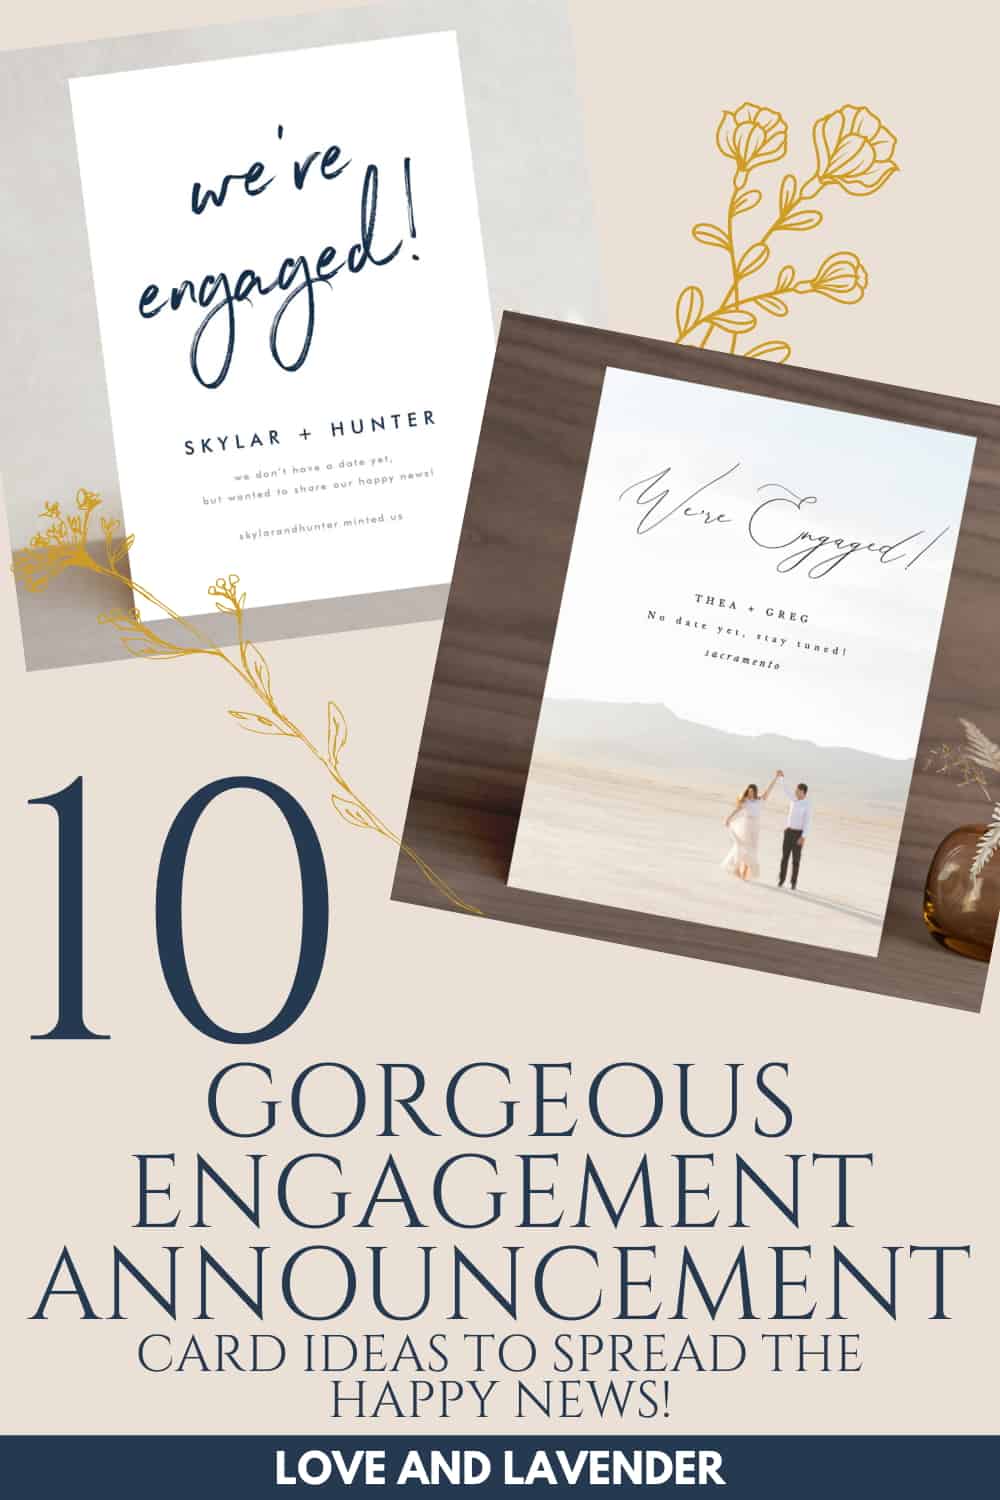 10 Gorgeous Engagement Announcement Card Ideas to Spread the Happy News!